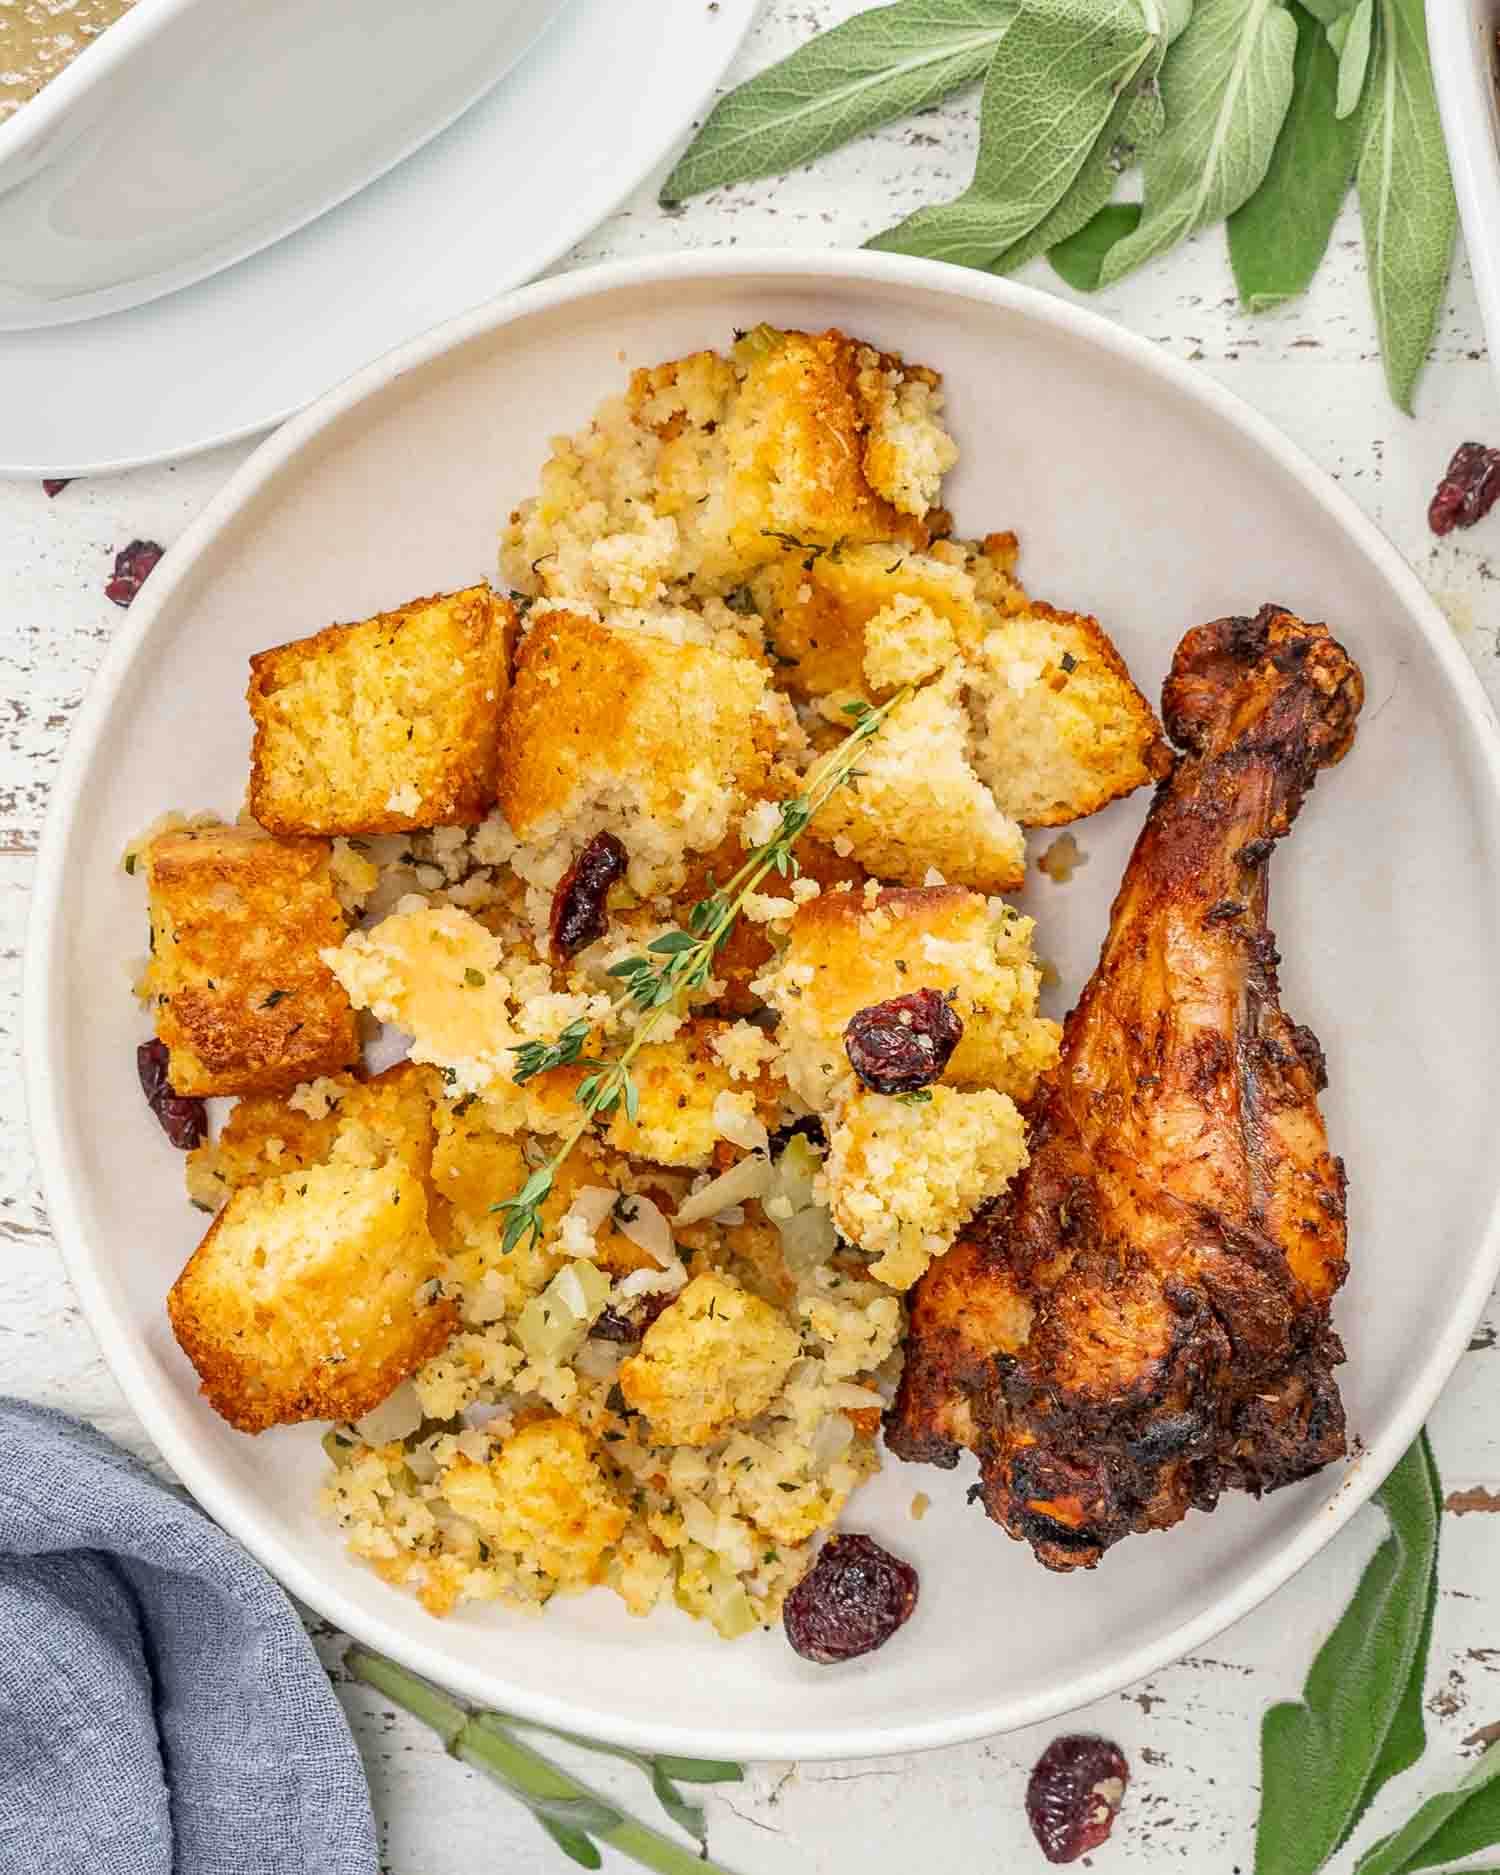 cornbread stuffing in a white dish with a turkey thigh.